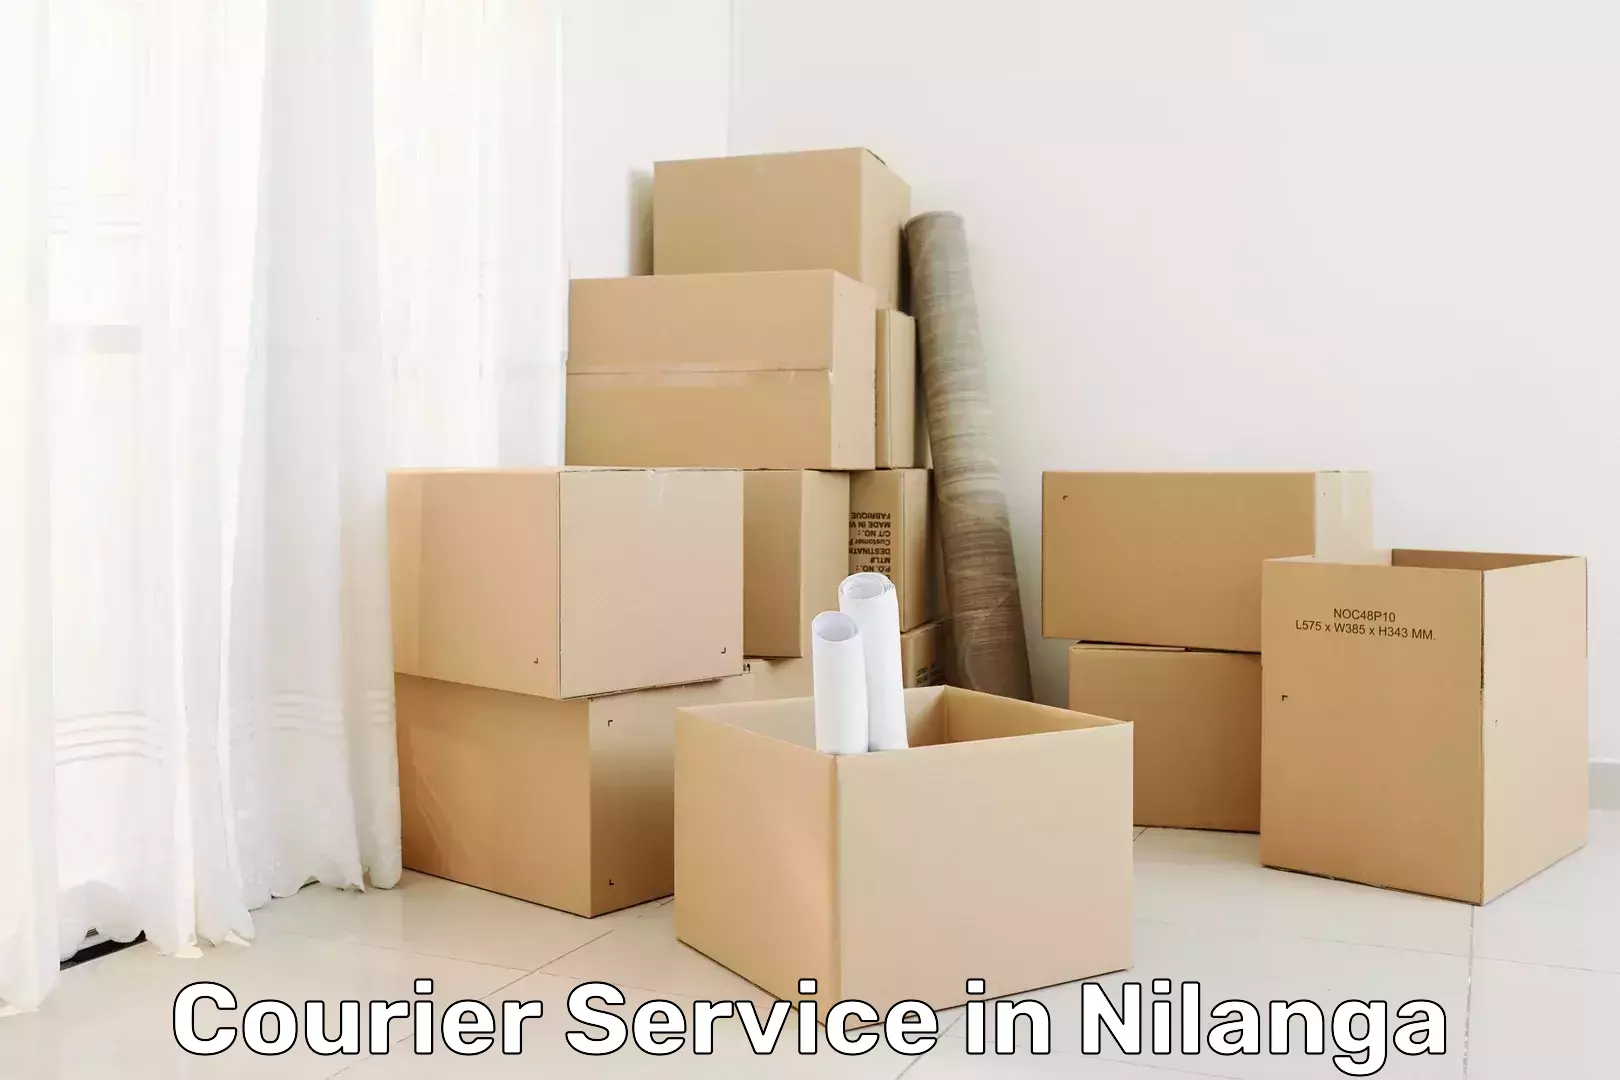 Automated shipping processes in Nilanga